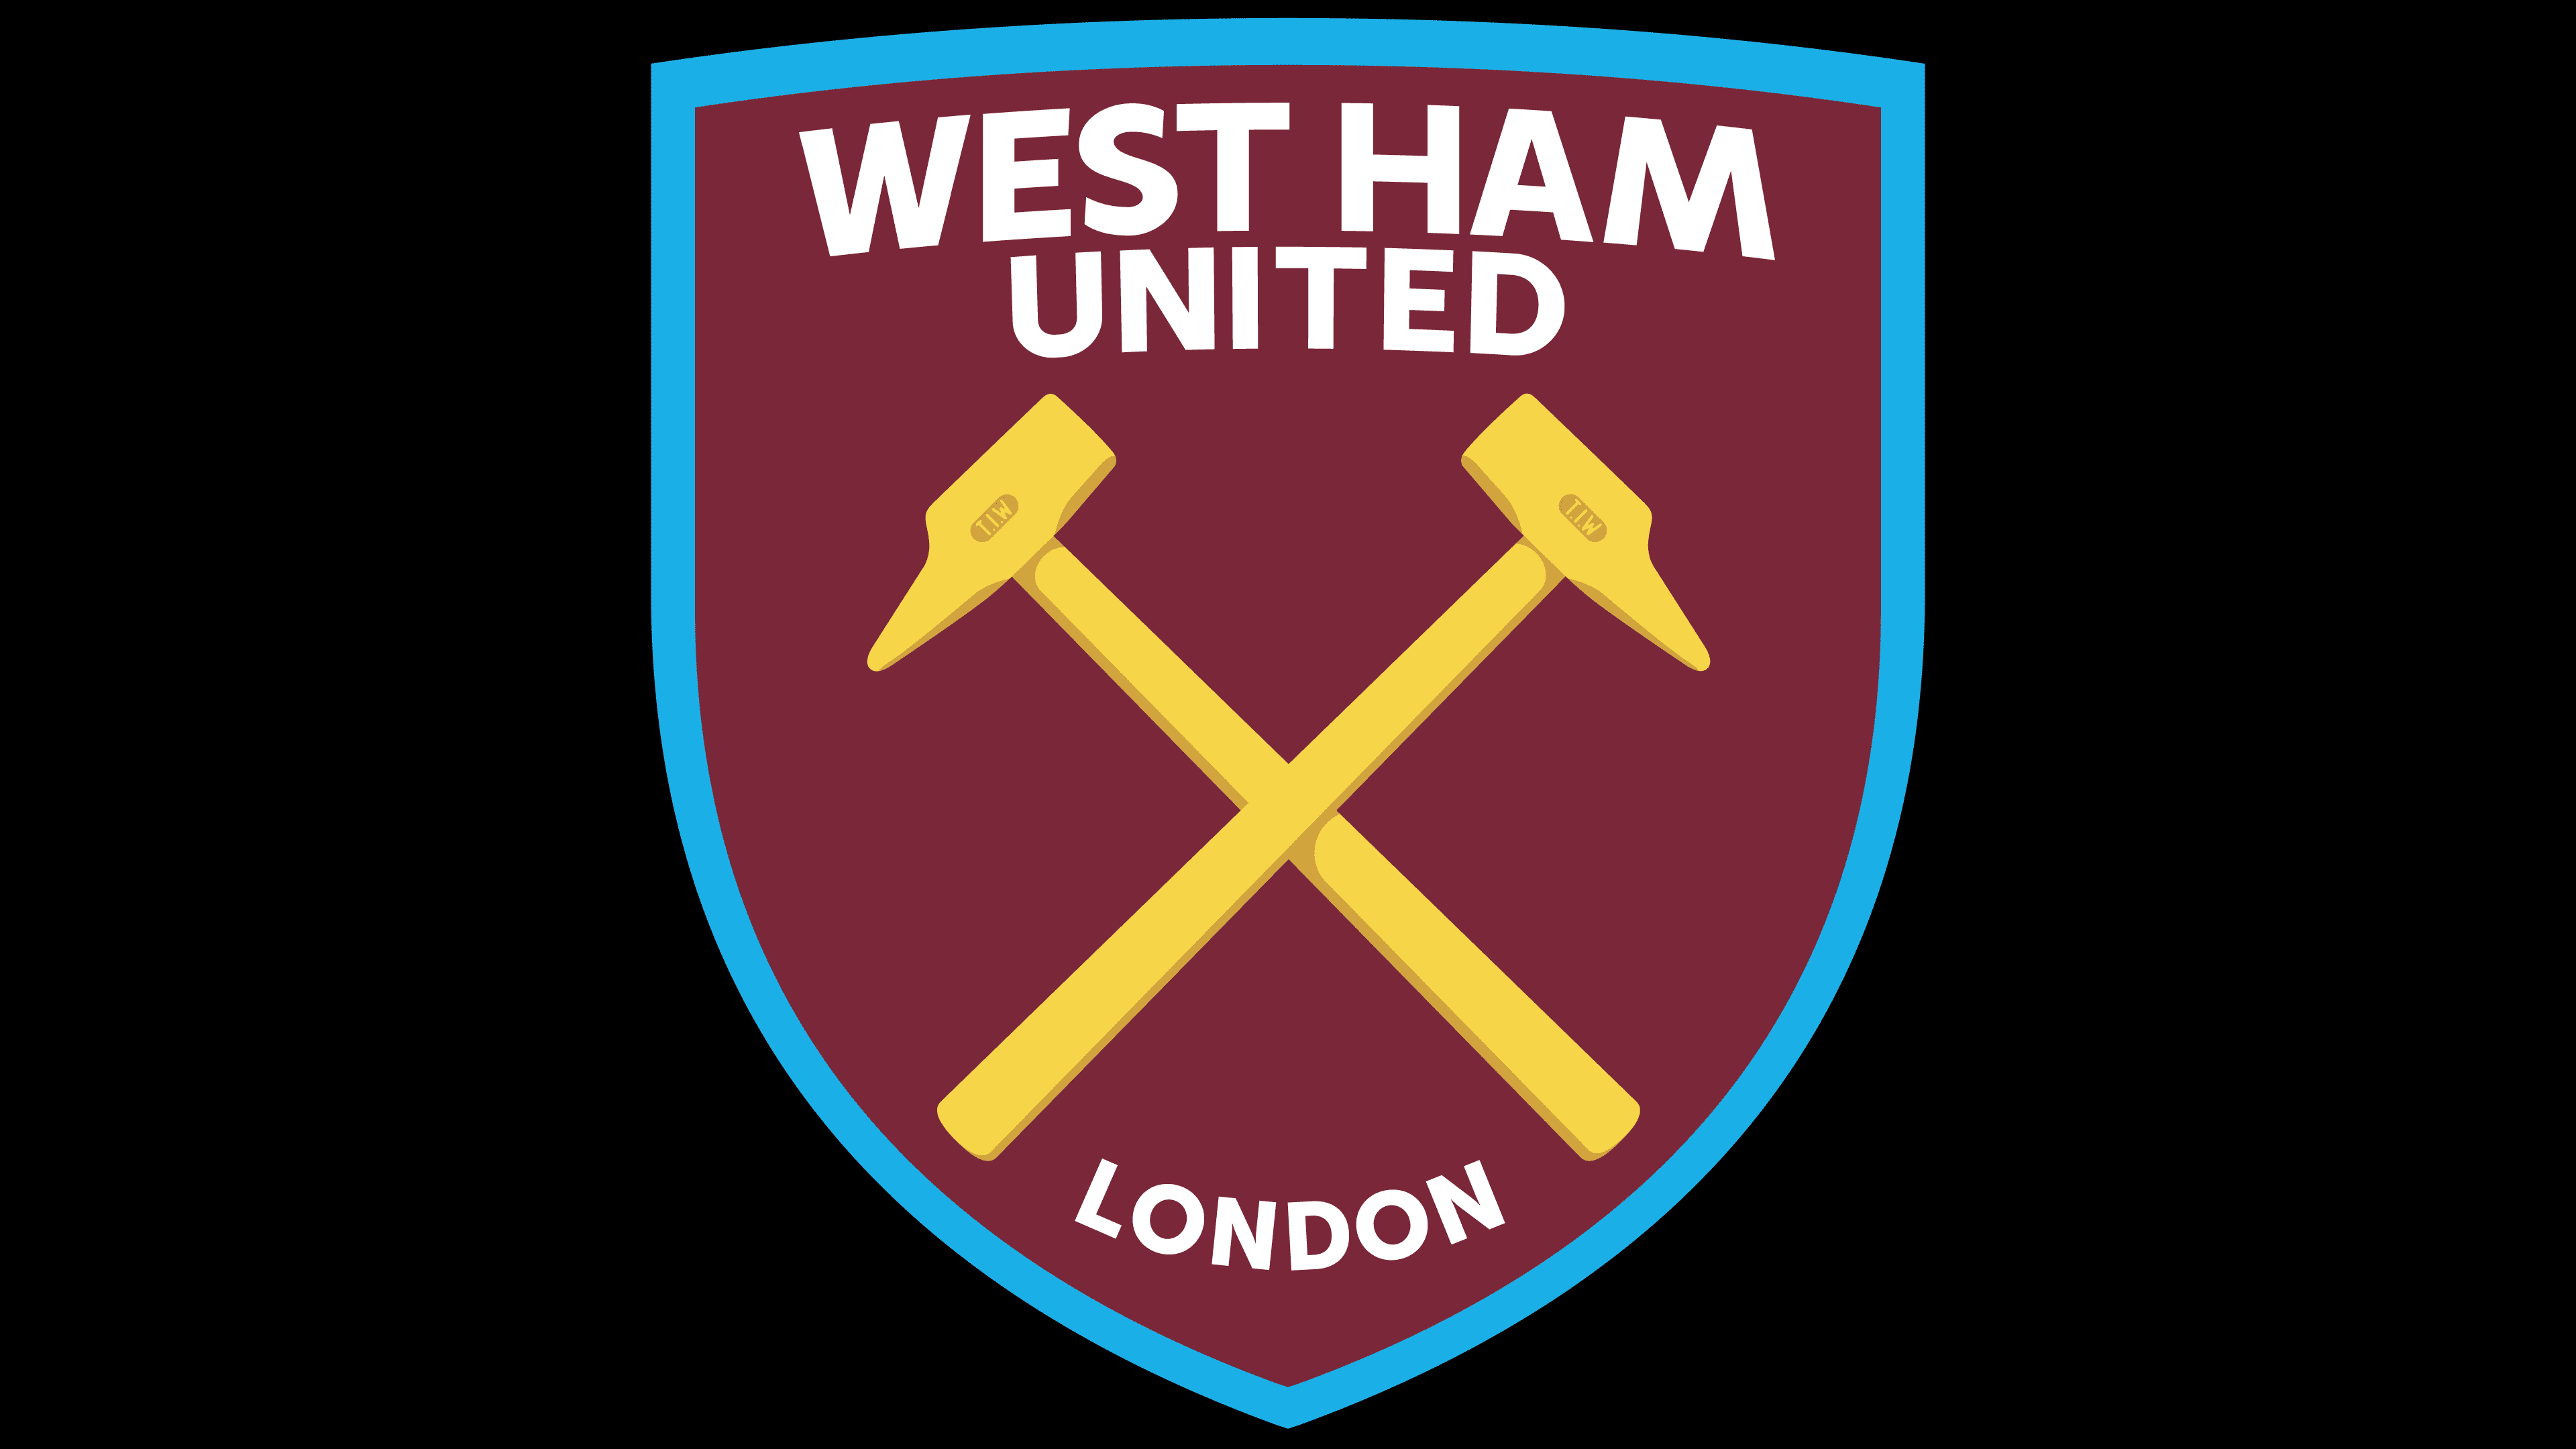 West Ham Logo The Most Famous Brands And Company Logos In The World